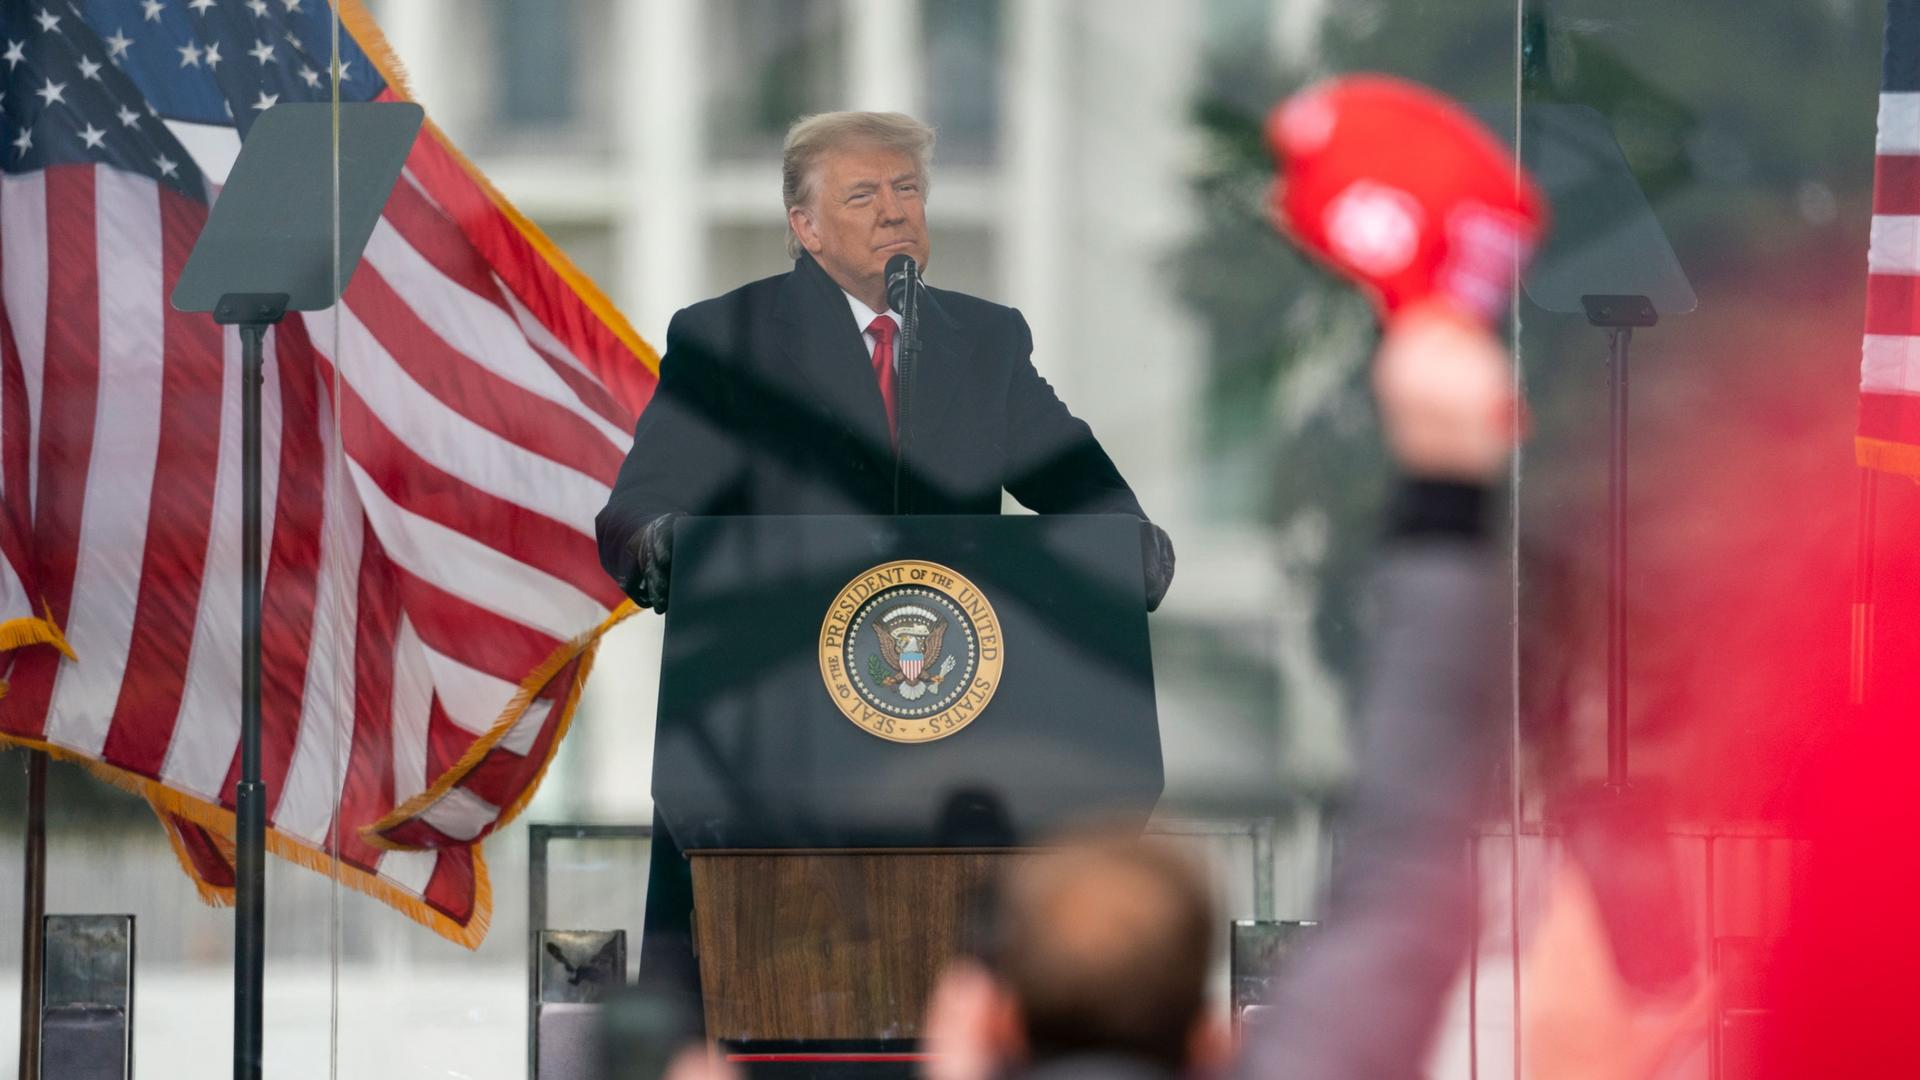 President Donald Trump is shown standing at a podium speaking with US flags waving behind him.